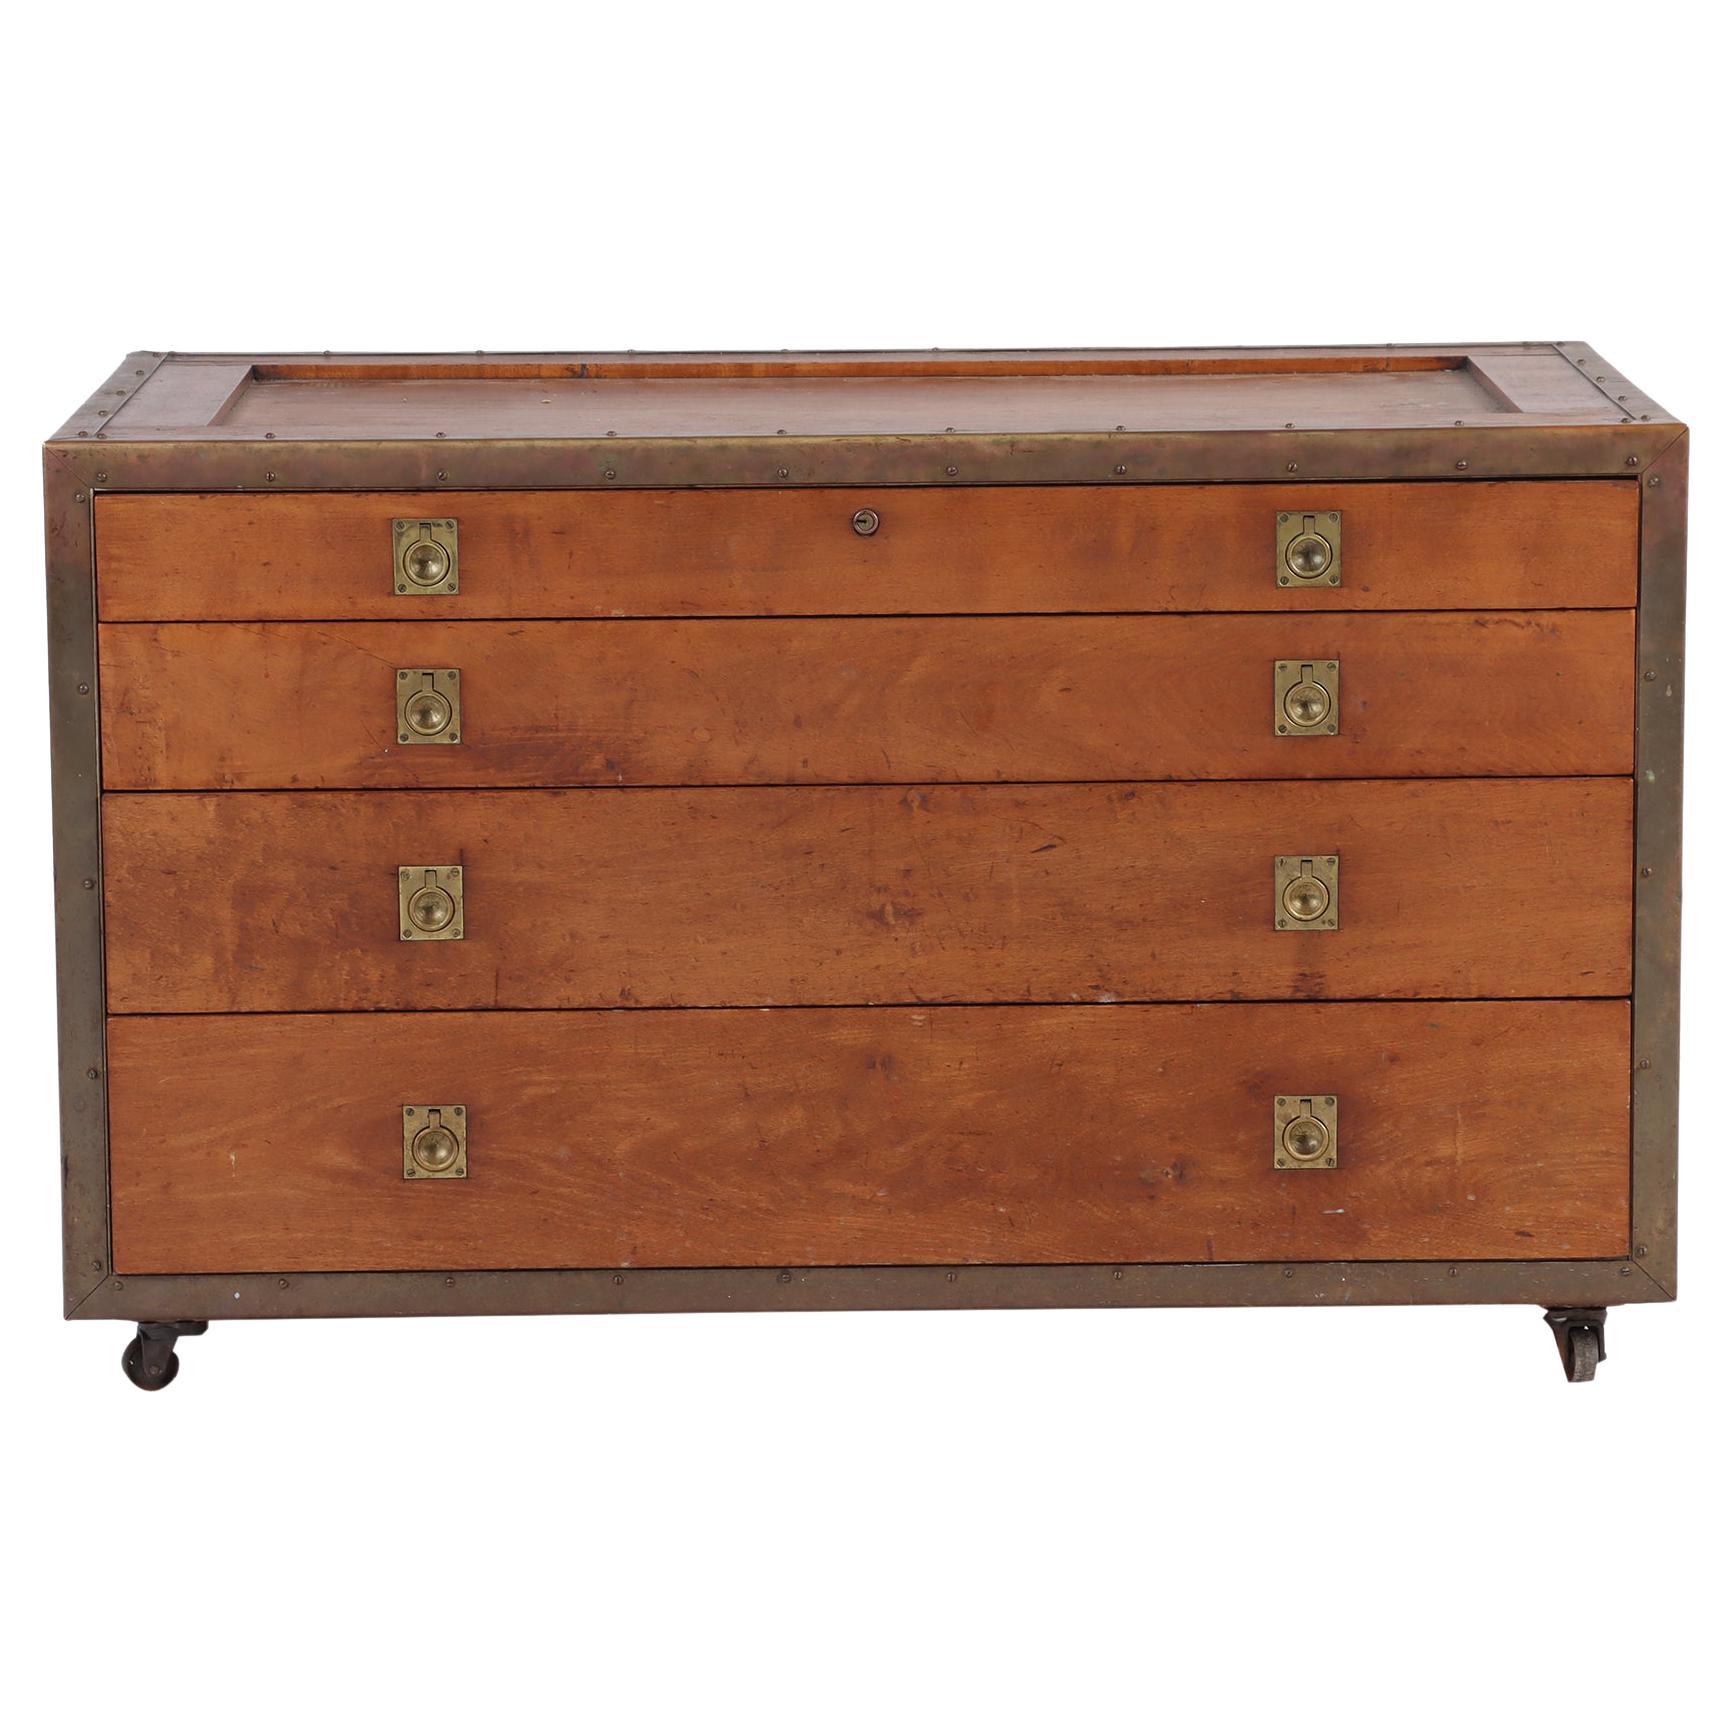 Campaign Chest of Drawers, Wrapped Brass on Wheels, American, 1940s For Sale